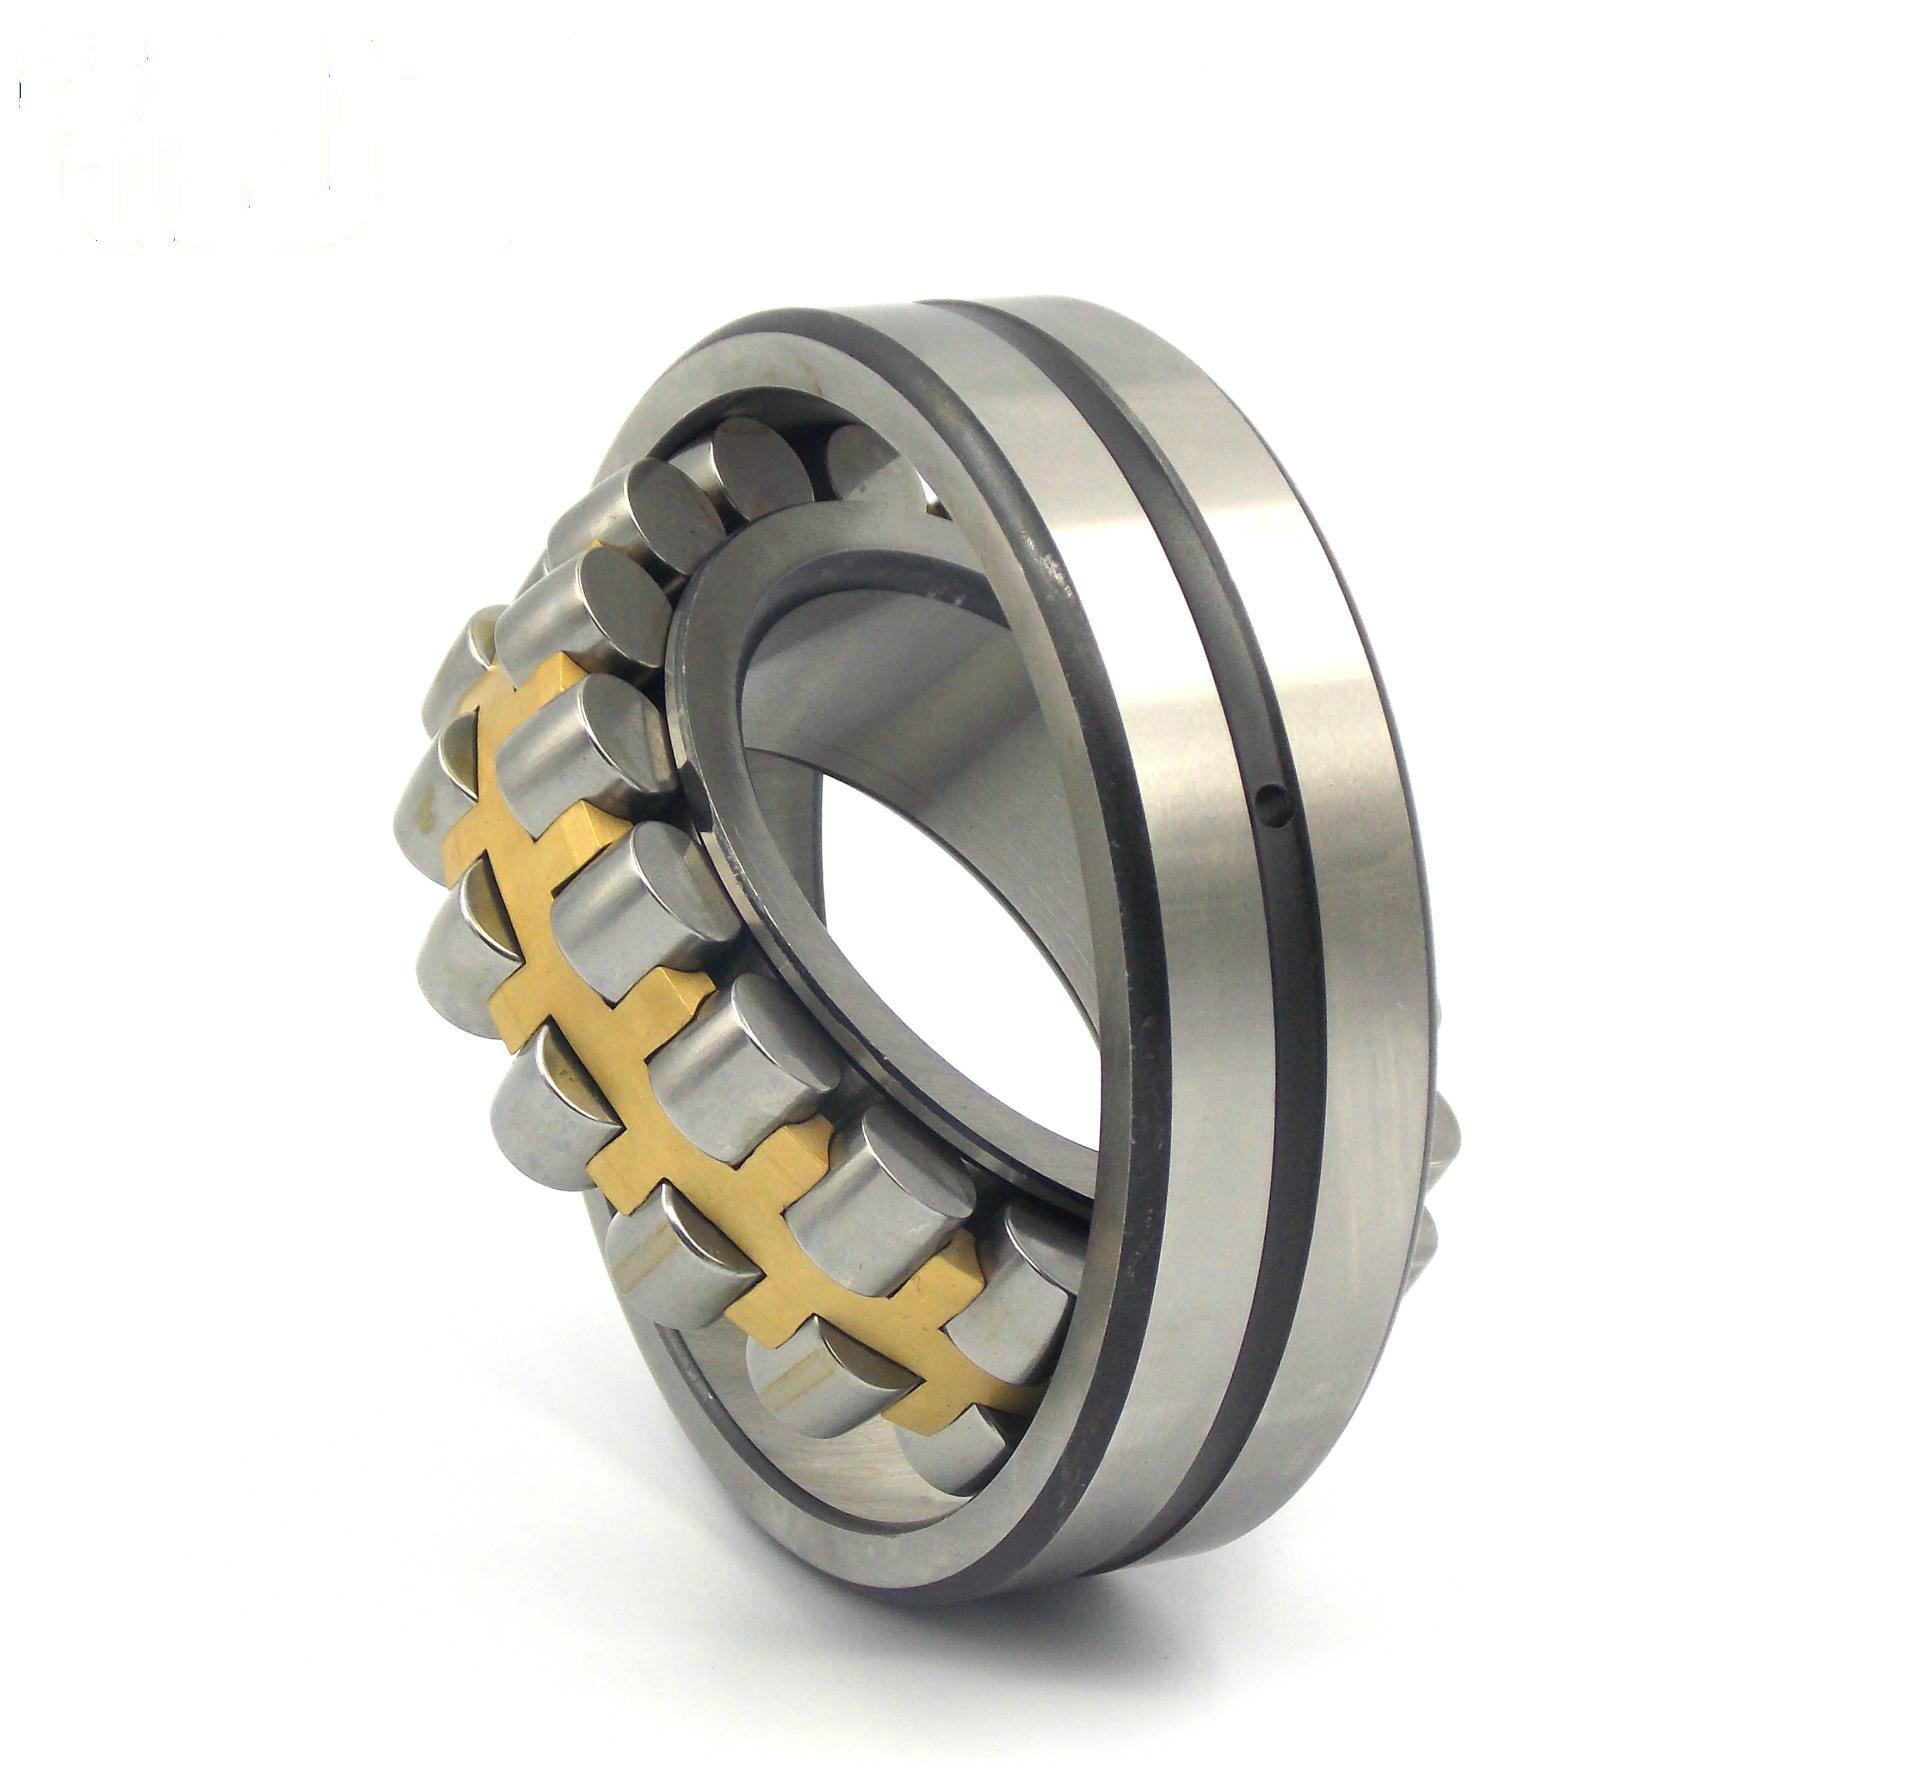  NU 2320 ML Cylindrical roller bearing